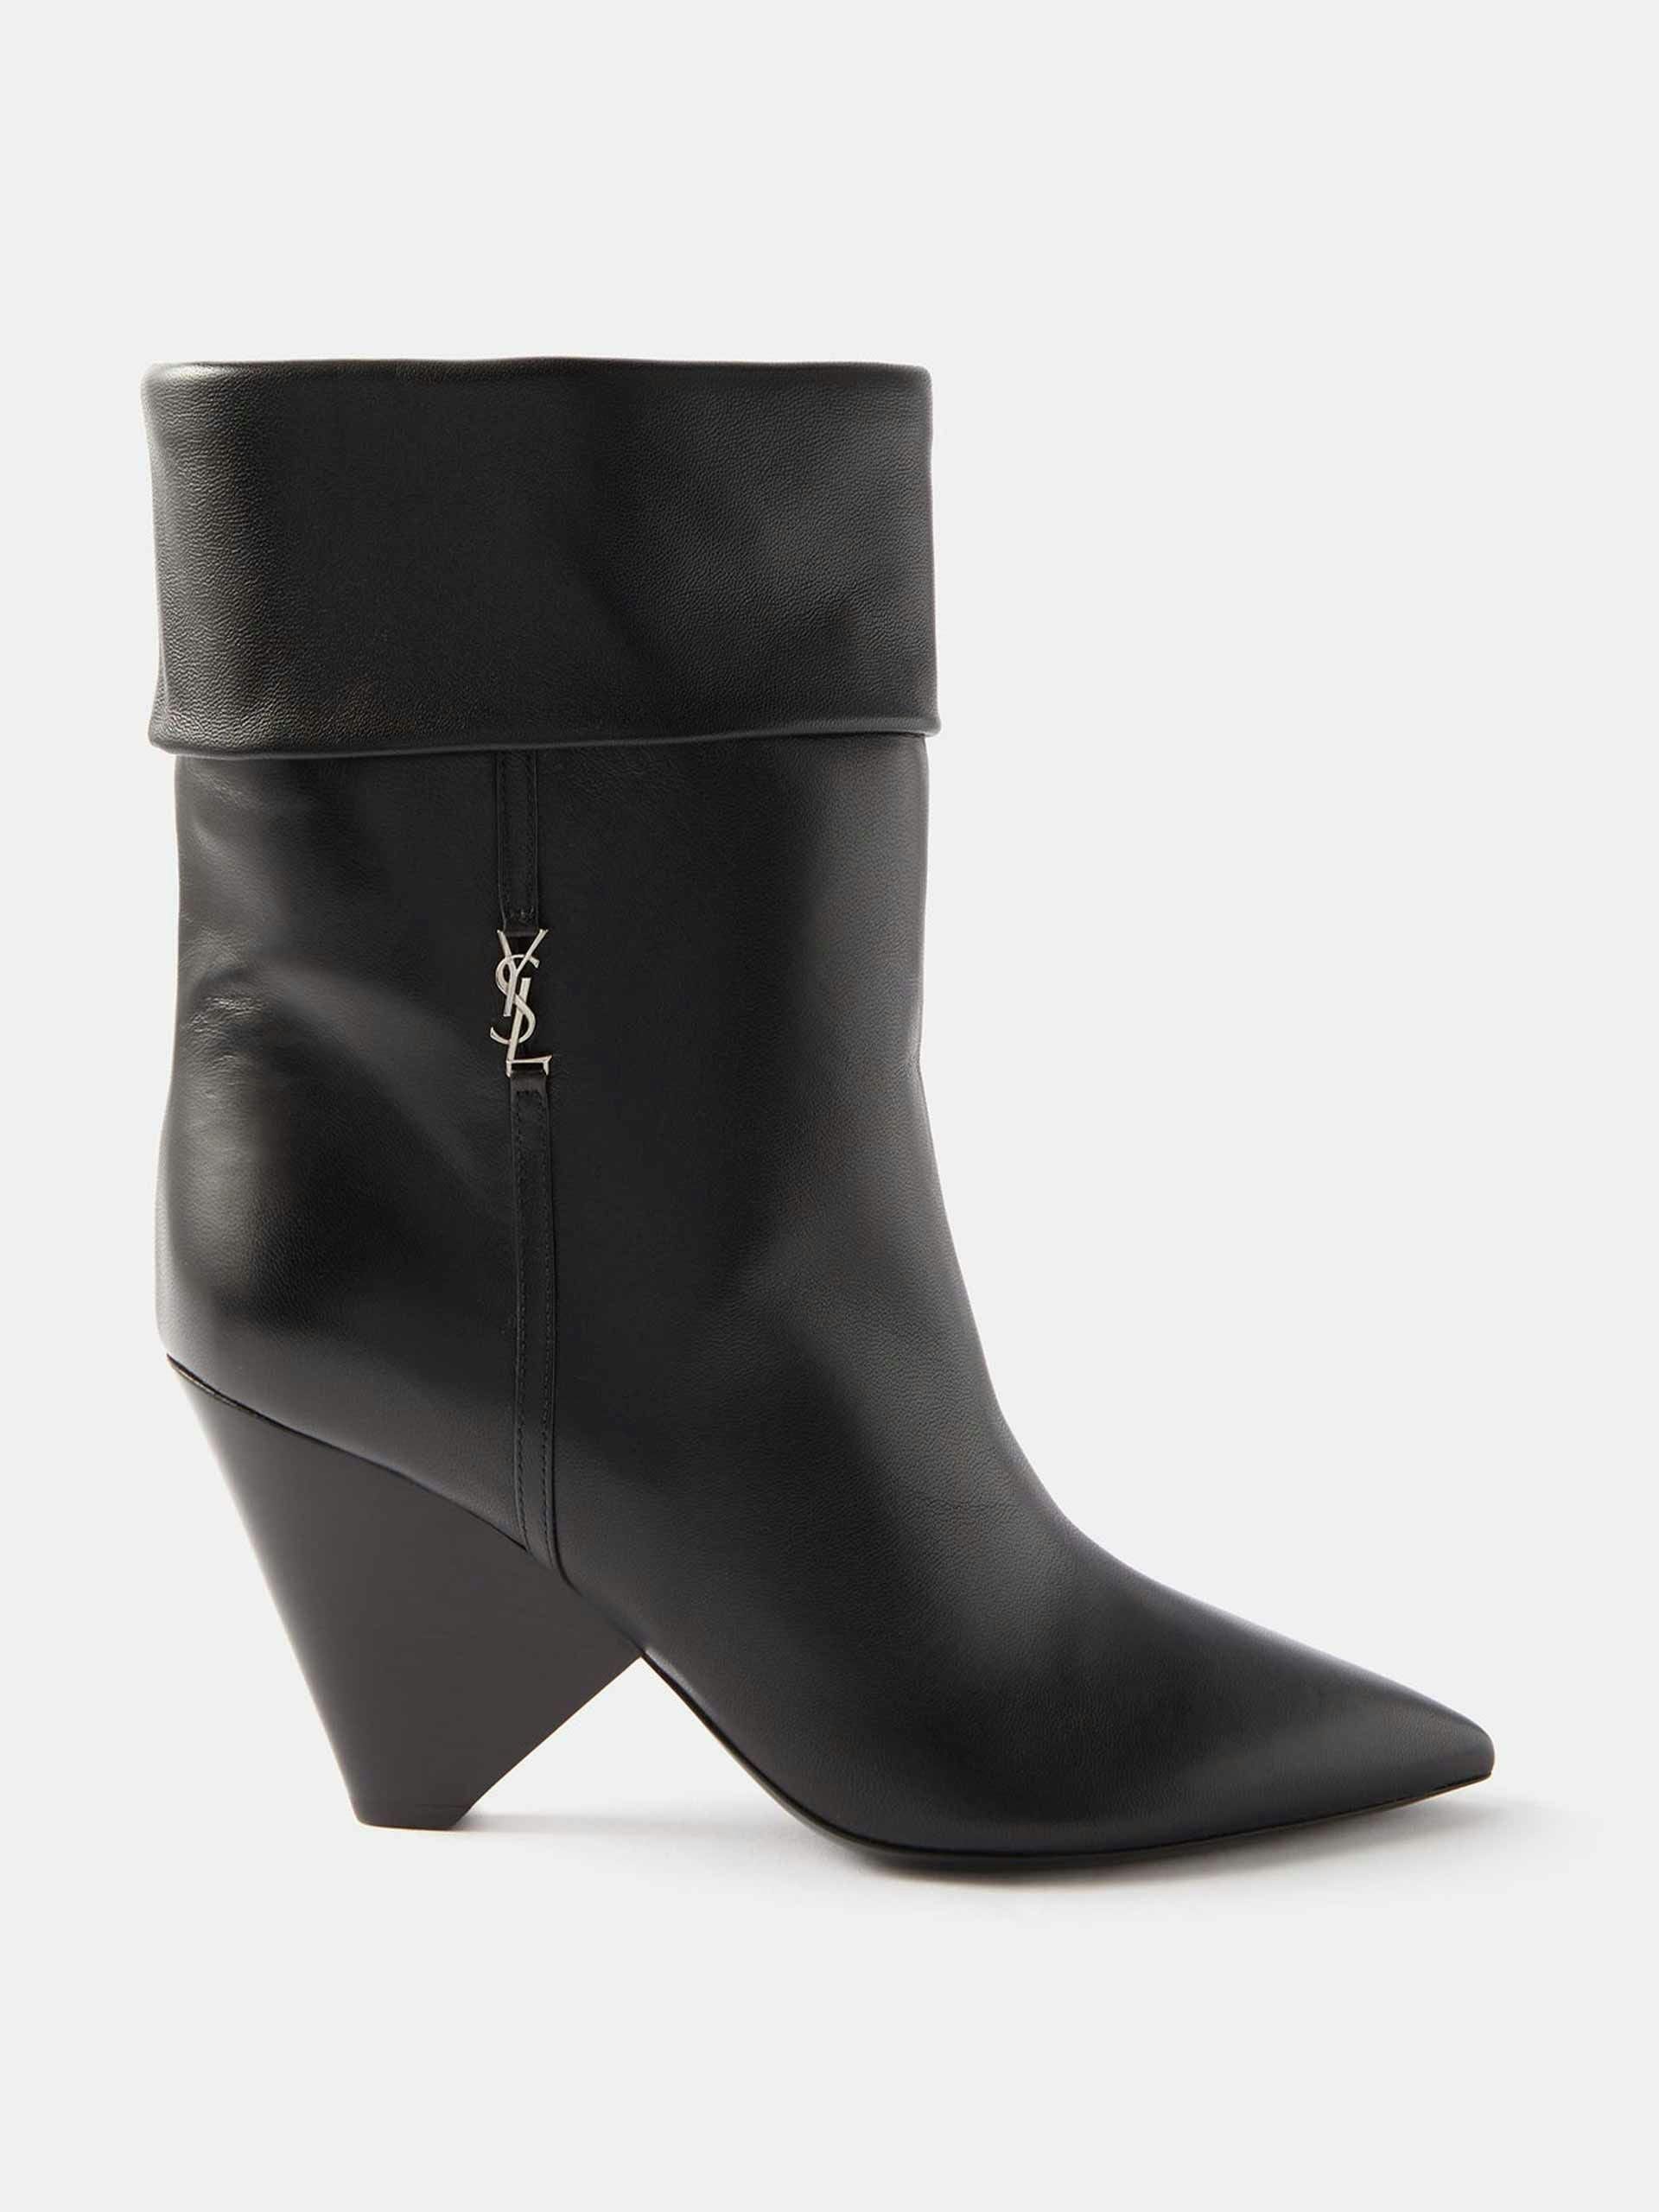 Niki 85 YSL-logo leather ankle boots